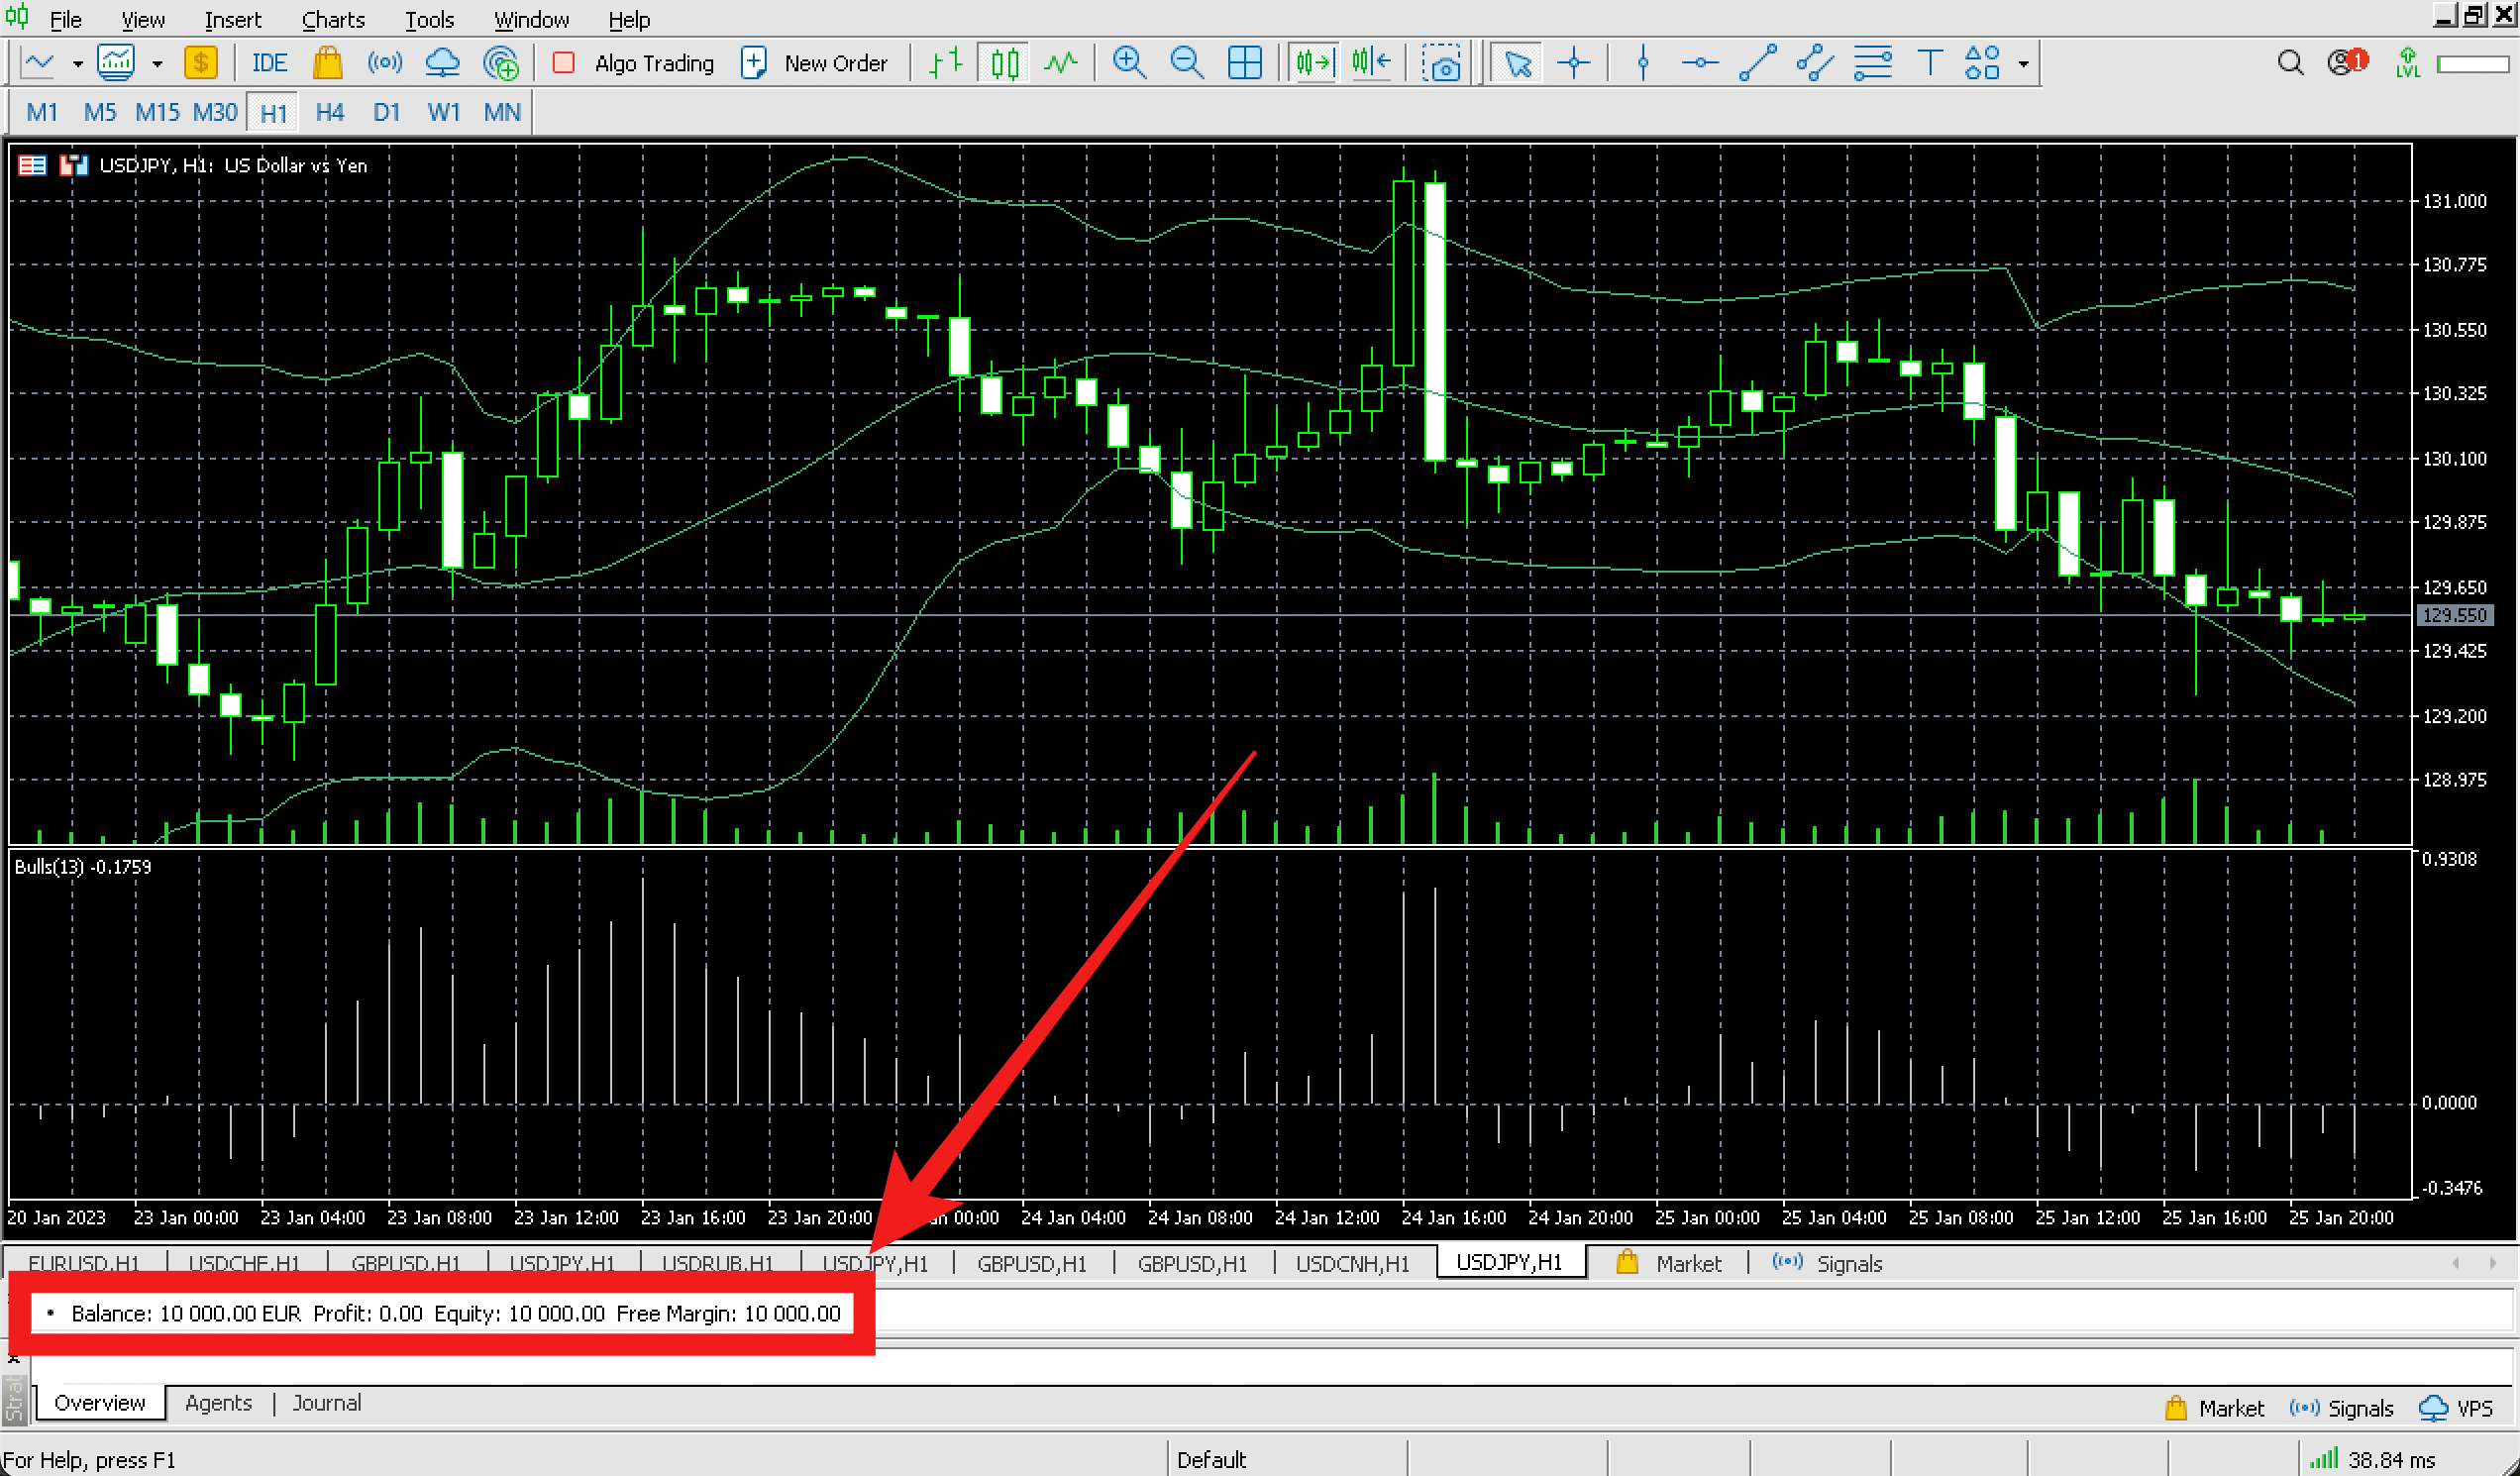 Funds in the MetaTrader 5 demo account